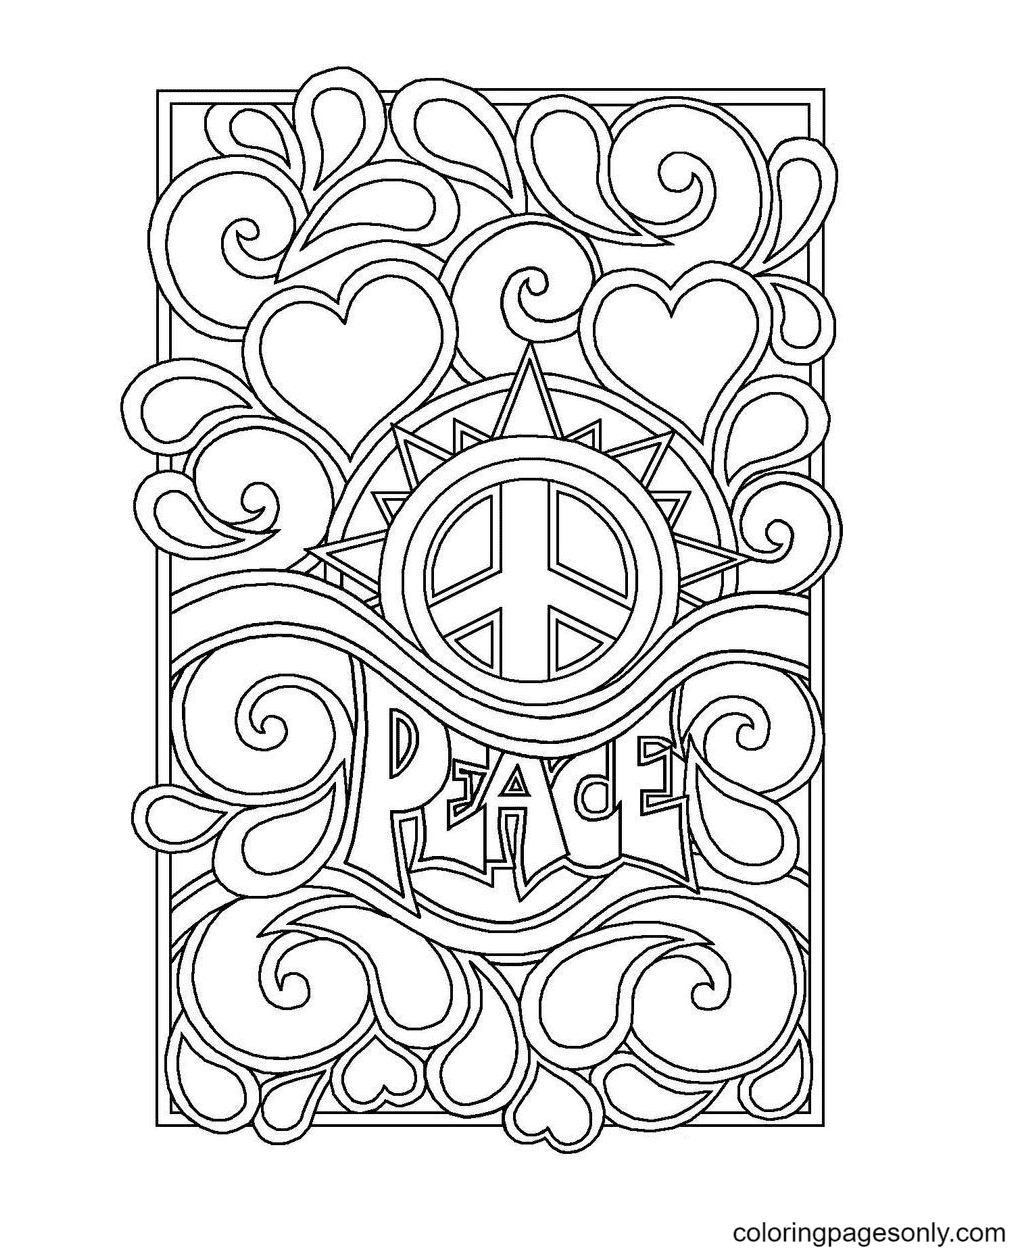 Peace Sign Free Printable Coloring Pages - International Day of Peace  Coloring Pages - Coloring Pages For Kids And Adults